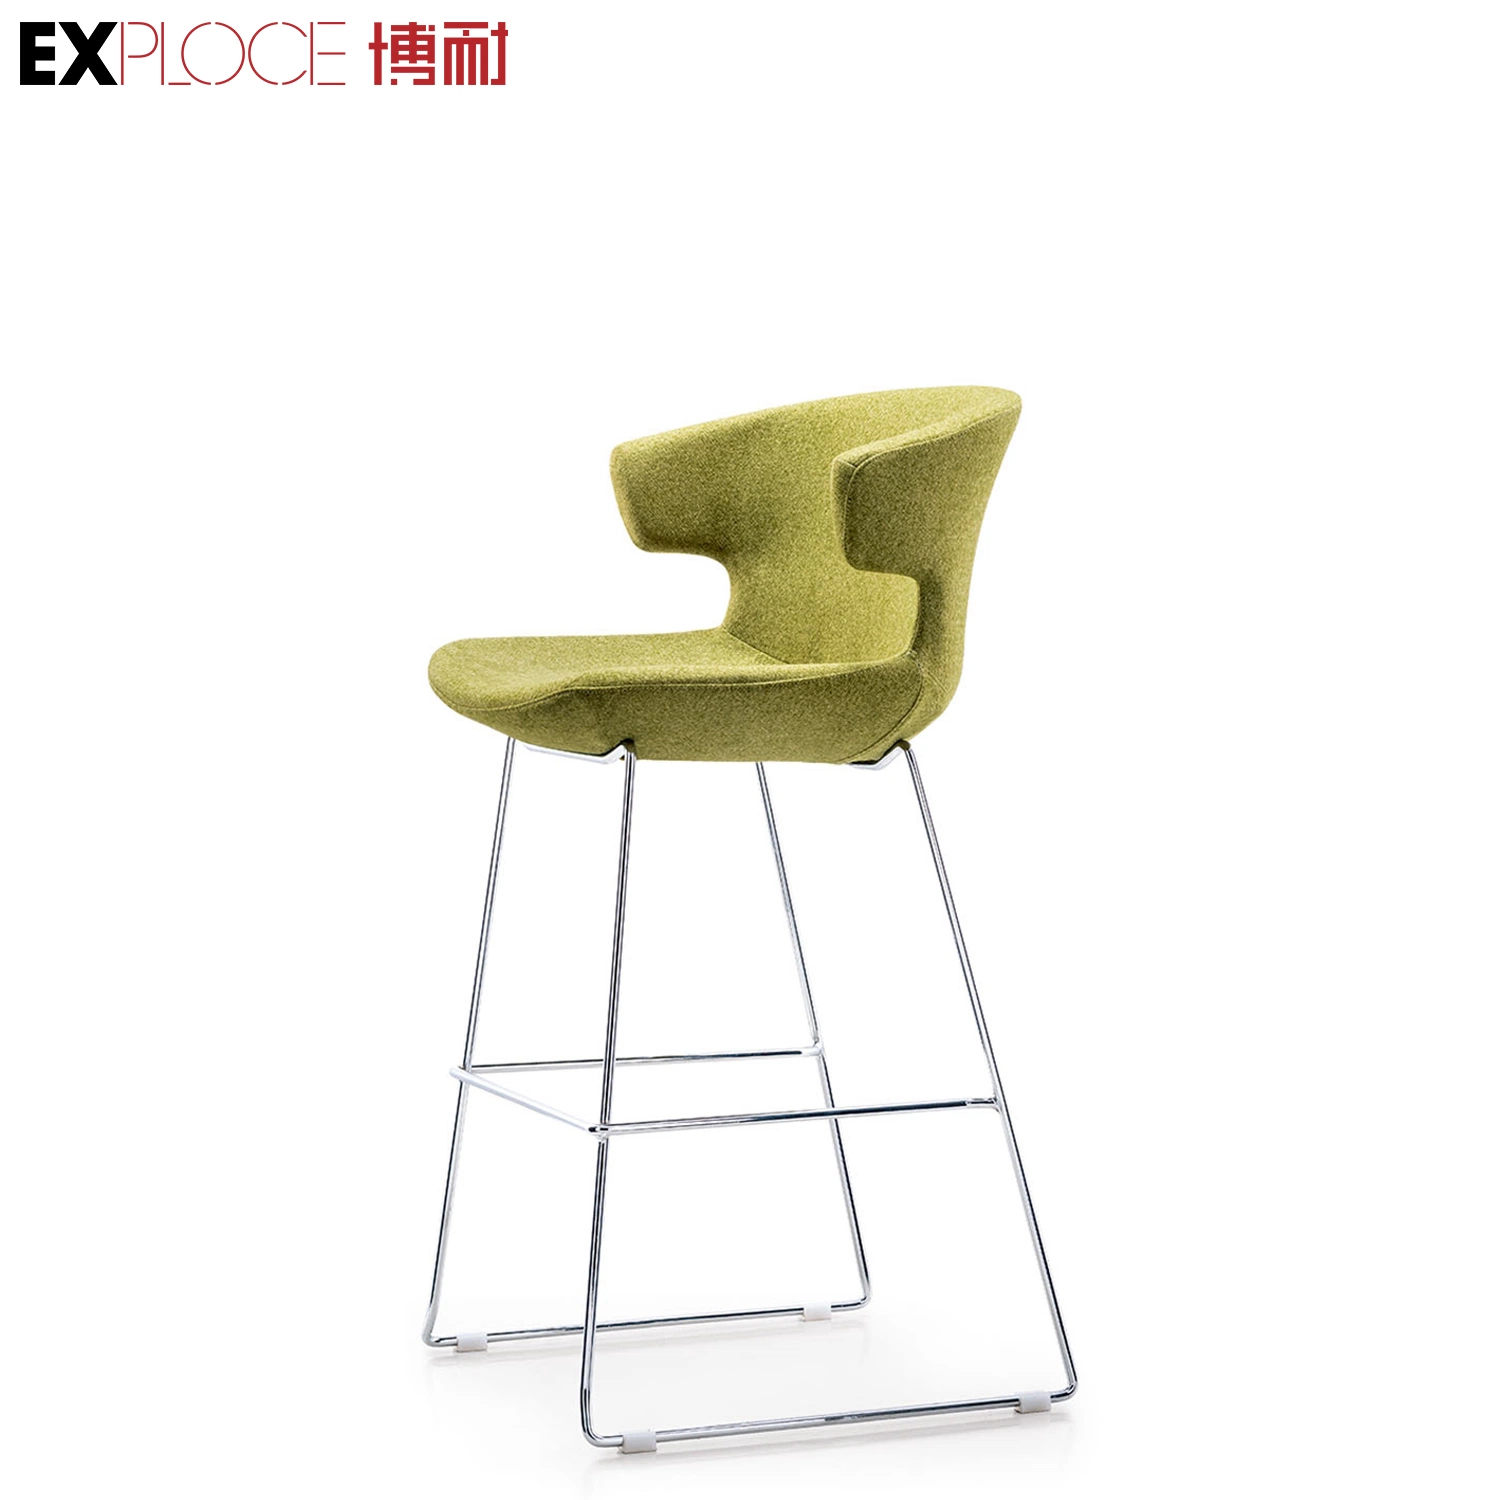 Hot Sale Modern Luxury Home Furniture Cheap Swivel Conference Room Computer Ergonomic Fabric Leisure Coffee Store Outdoor Executive Office Chair